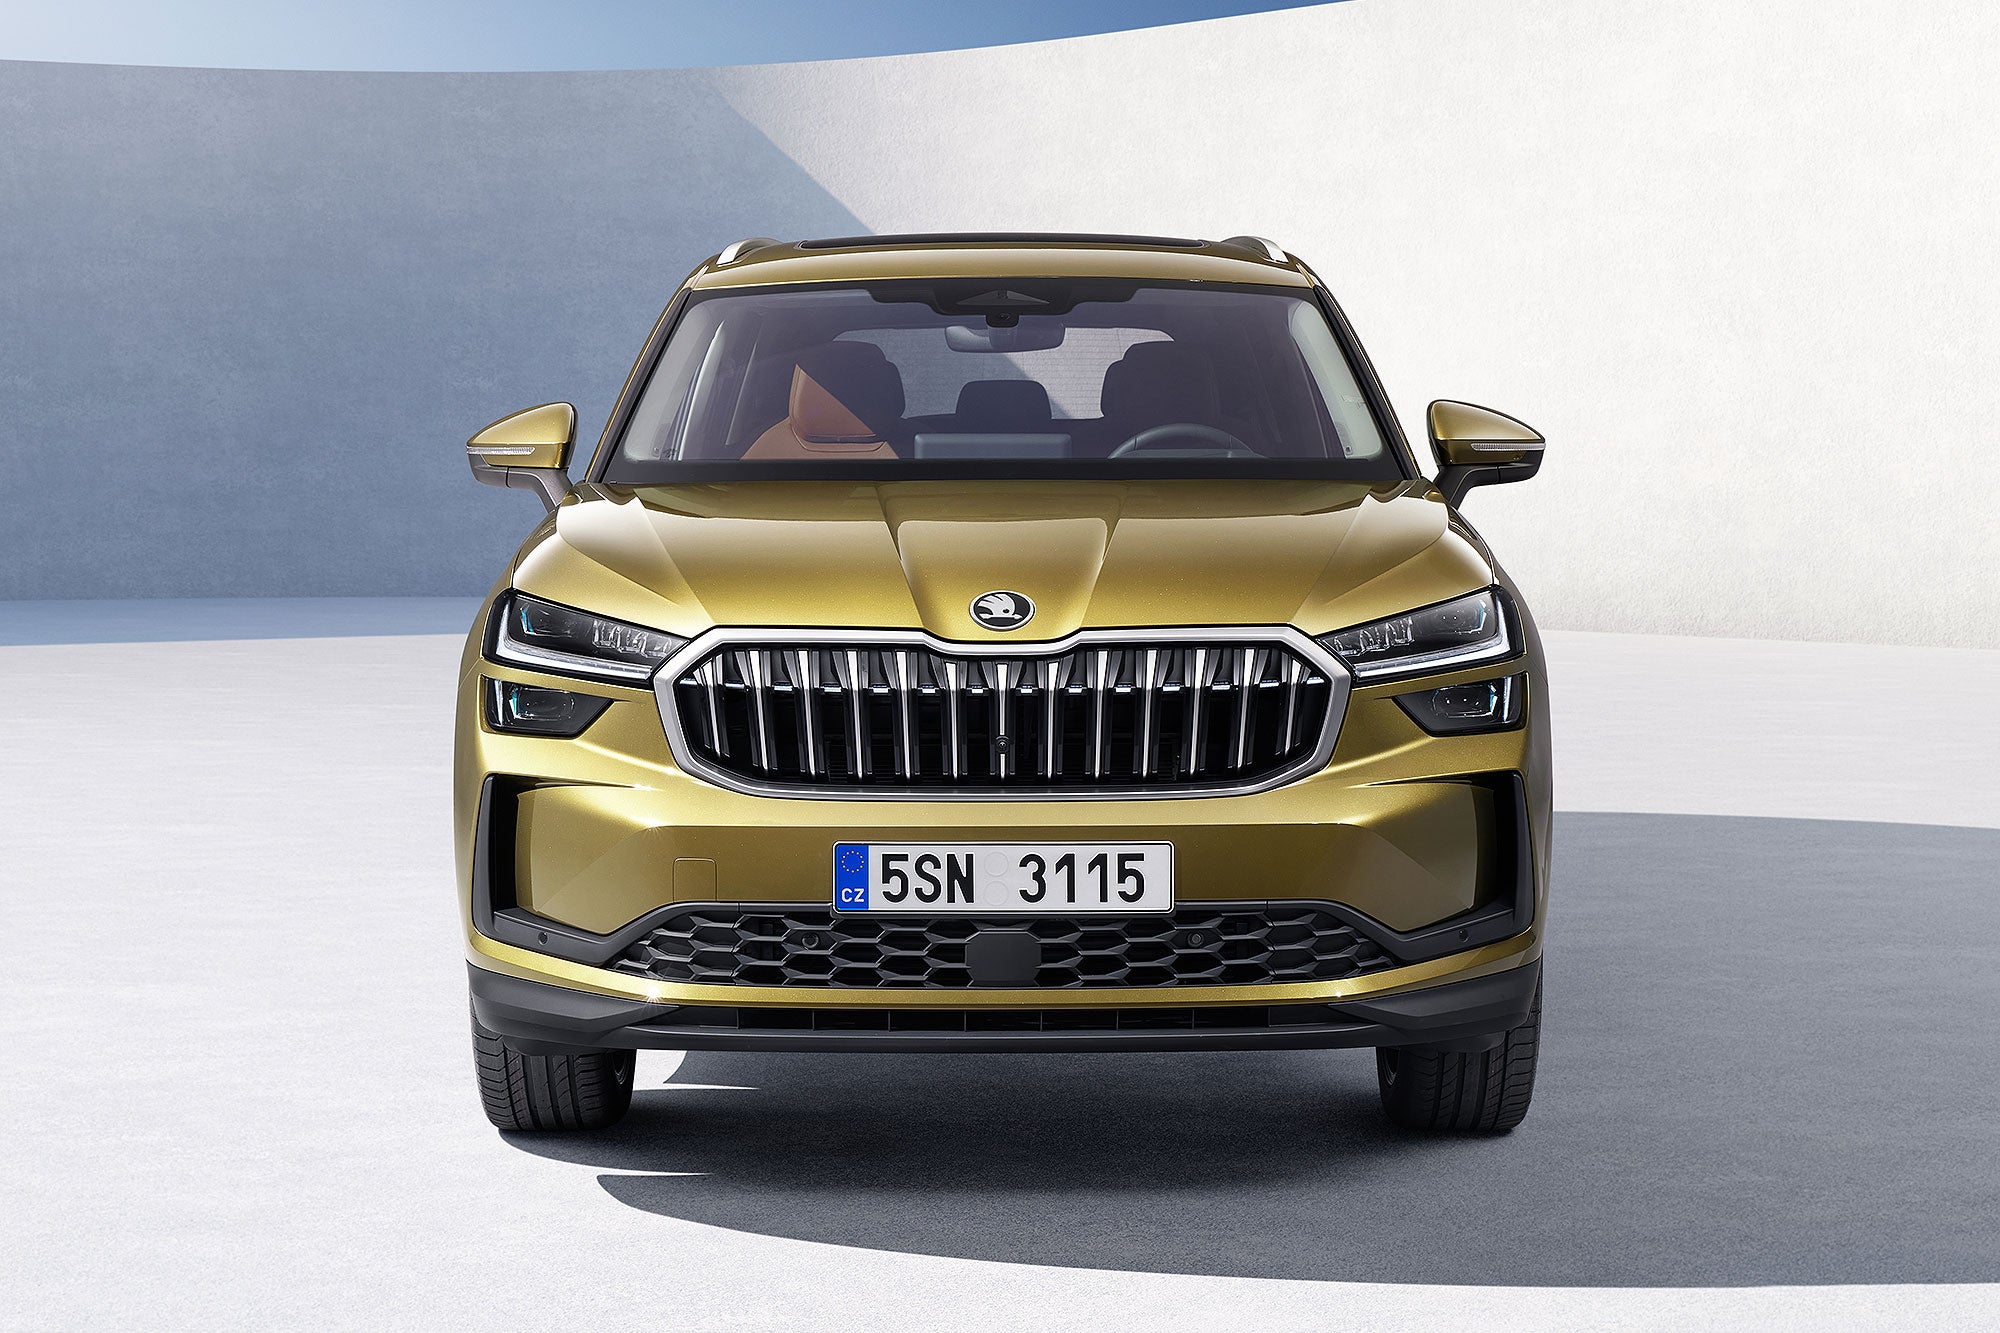 Skoda Kodiaq 2024 dimensions, boot space and electrification